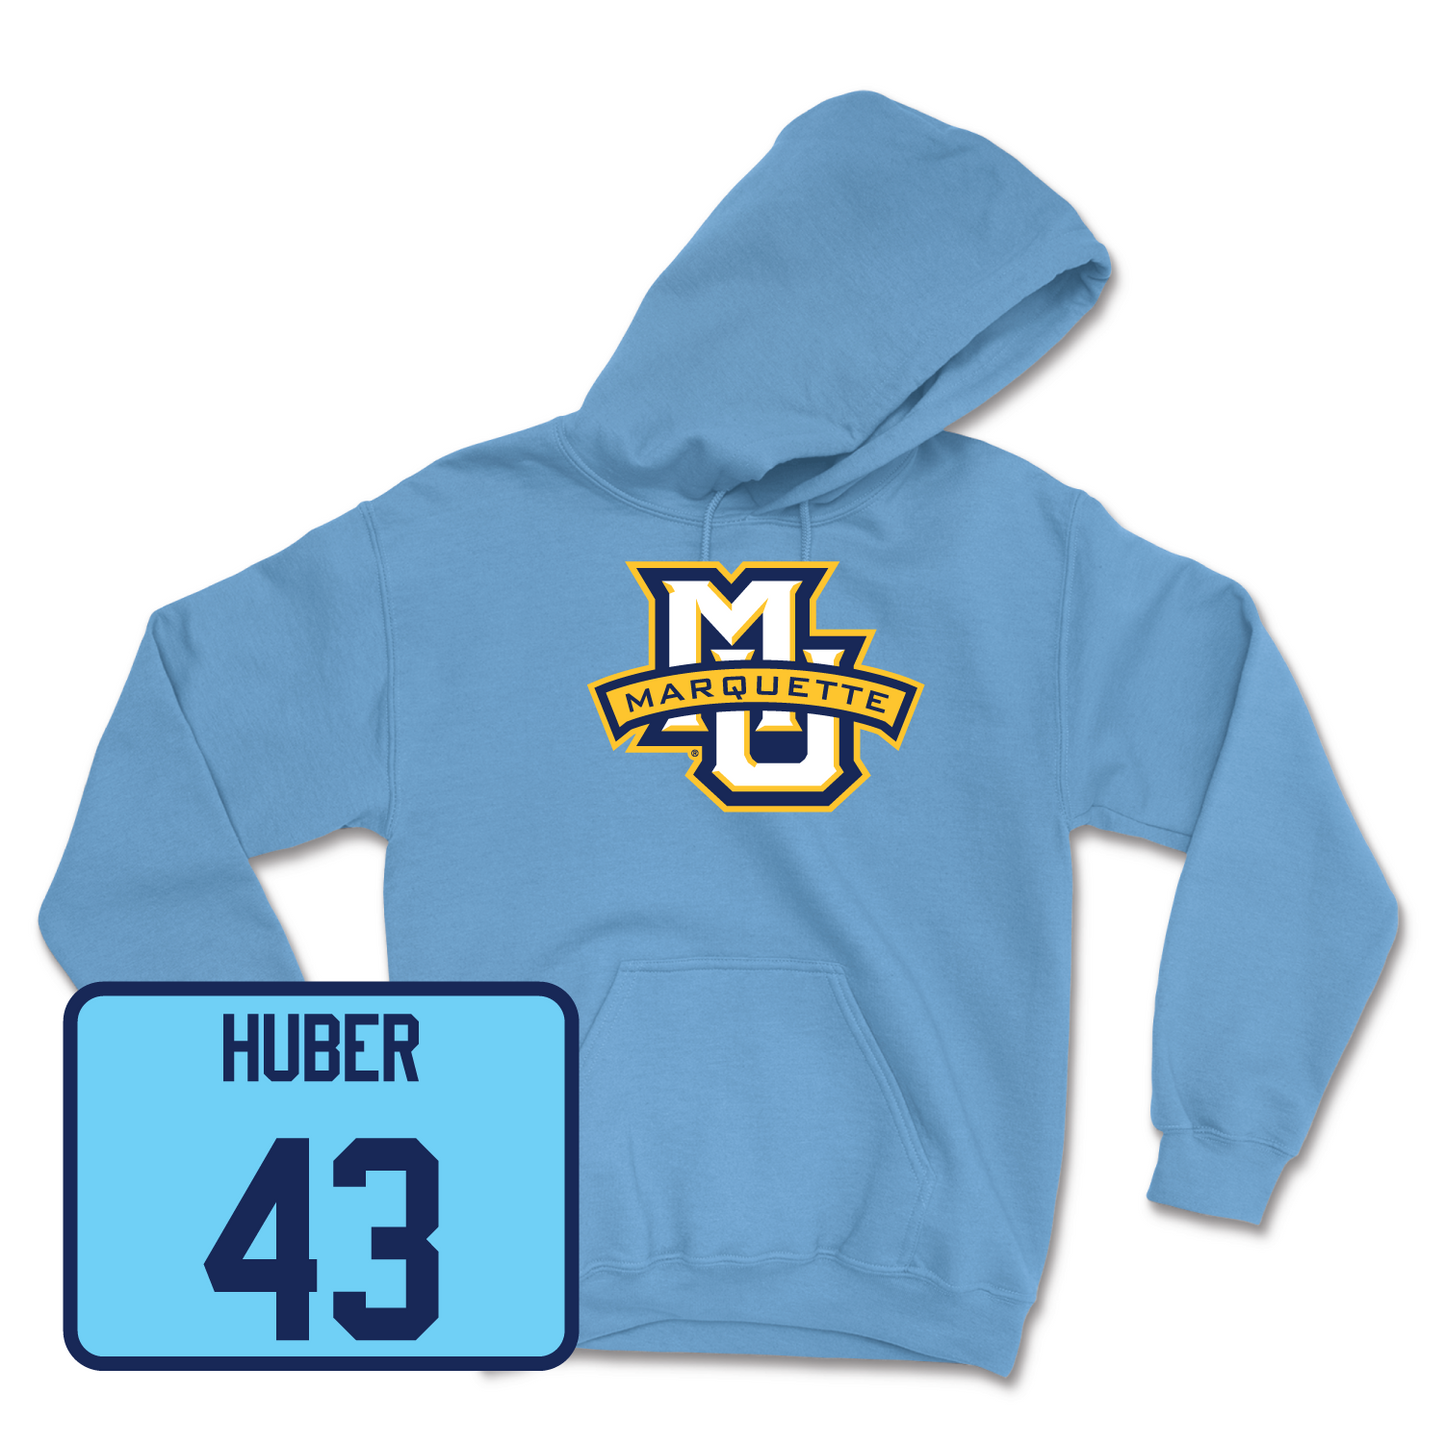 Championship Blue Women's Lacrosse Marquette Hoodie 2 Youth Large / Kaitlyn Huber | #43